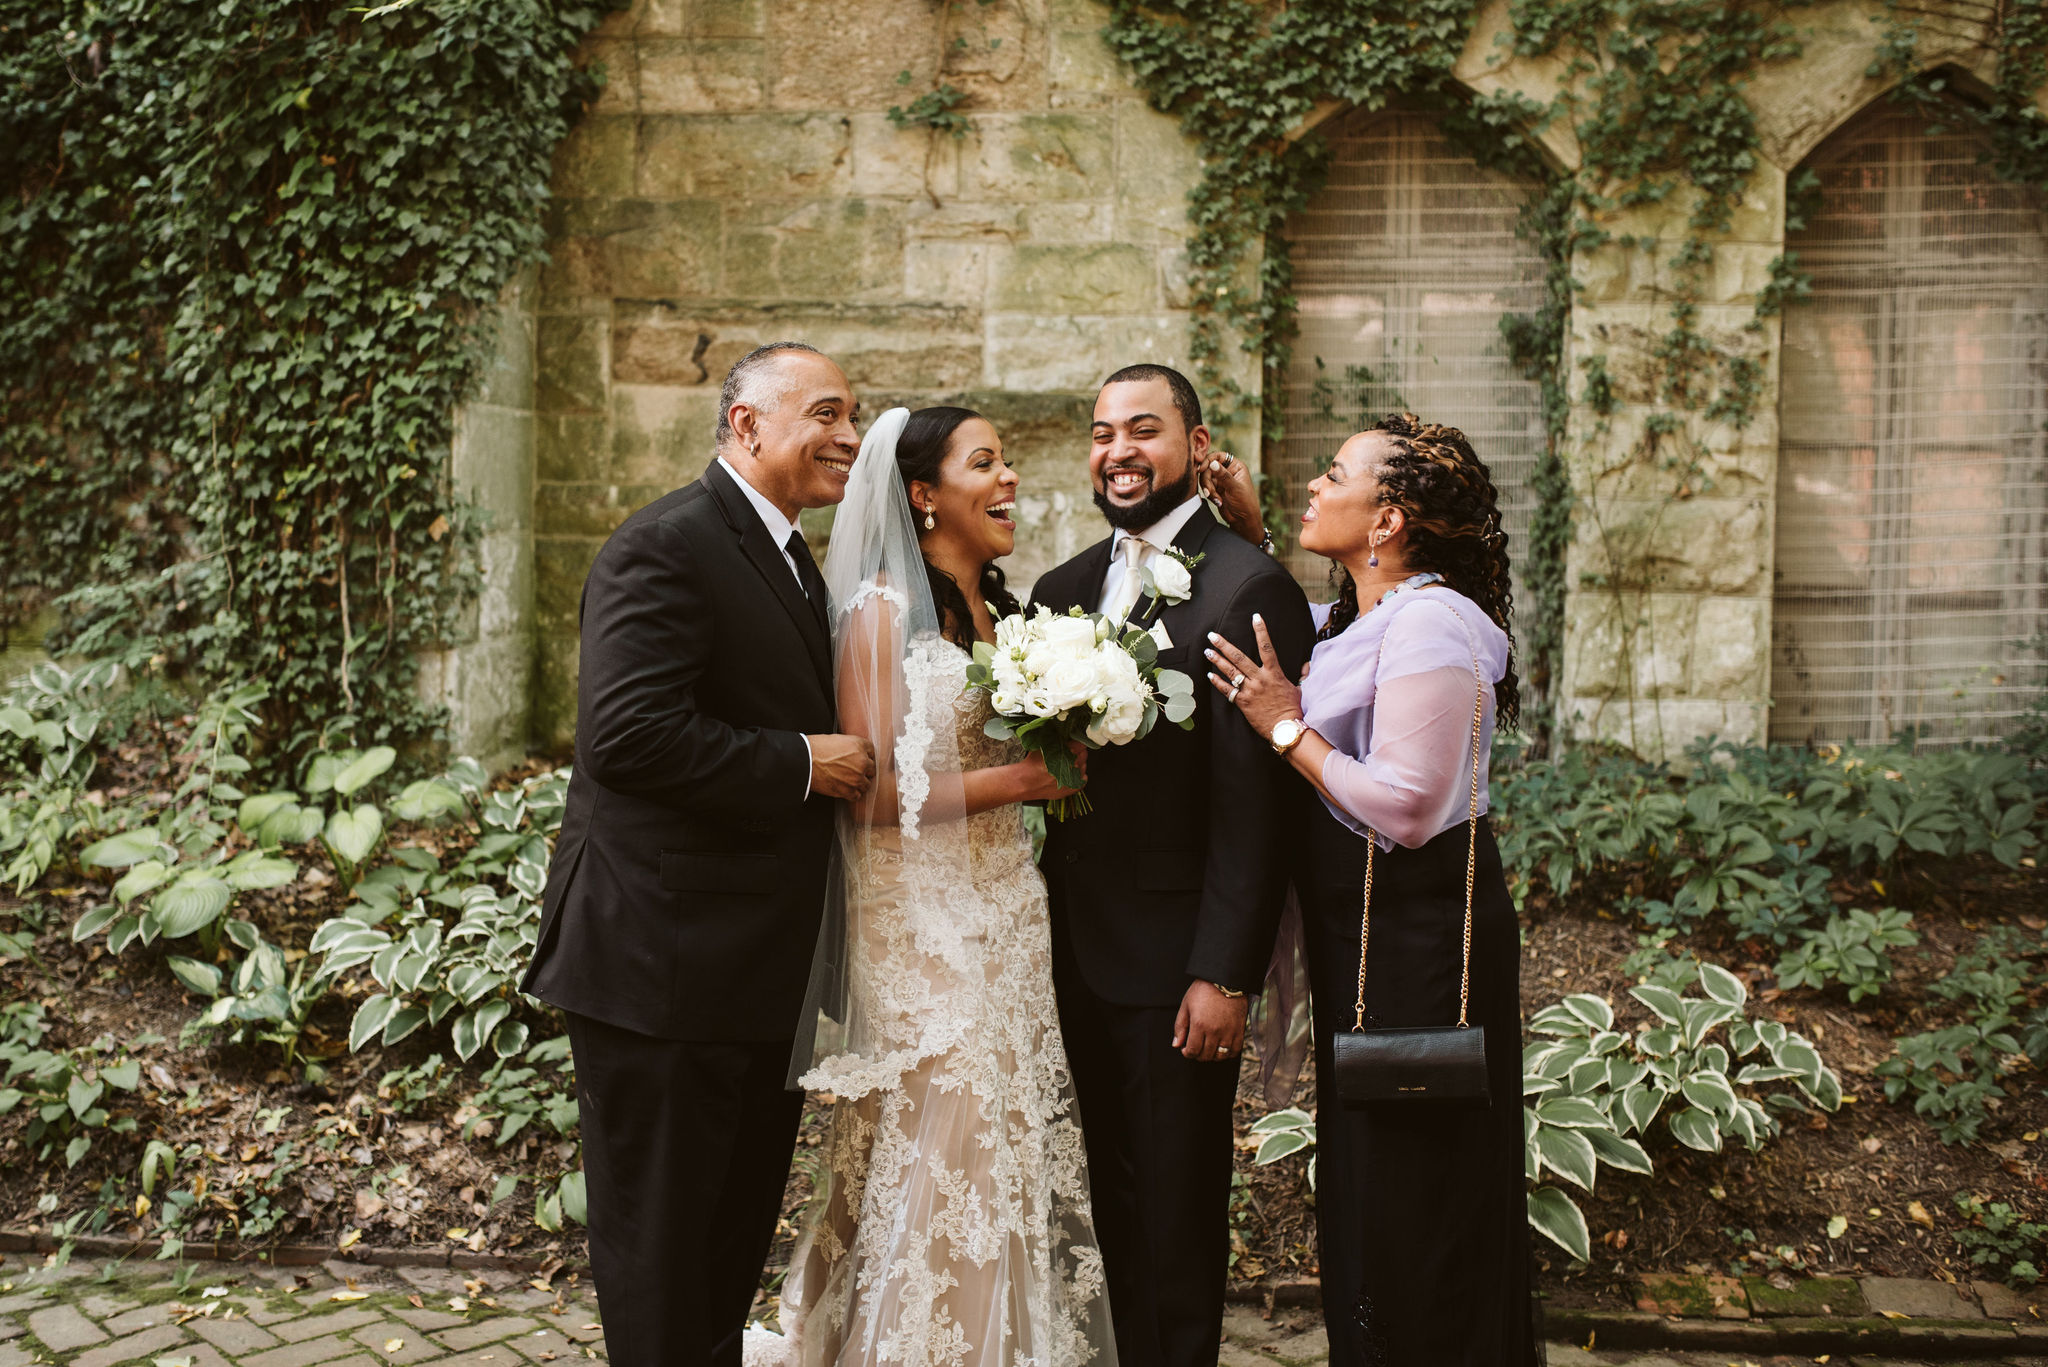  Baltimore, Maryland Wedding Photographer, Mount Vernon, Chase Court, Classic, Outdoor Ceremony, Garden, Romantic, Fun Portrait of Bride and Groom with Parents, Couple Laughing Together 